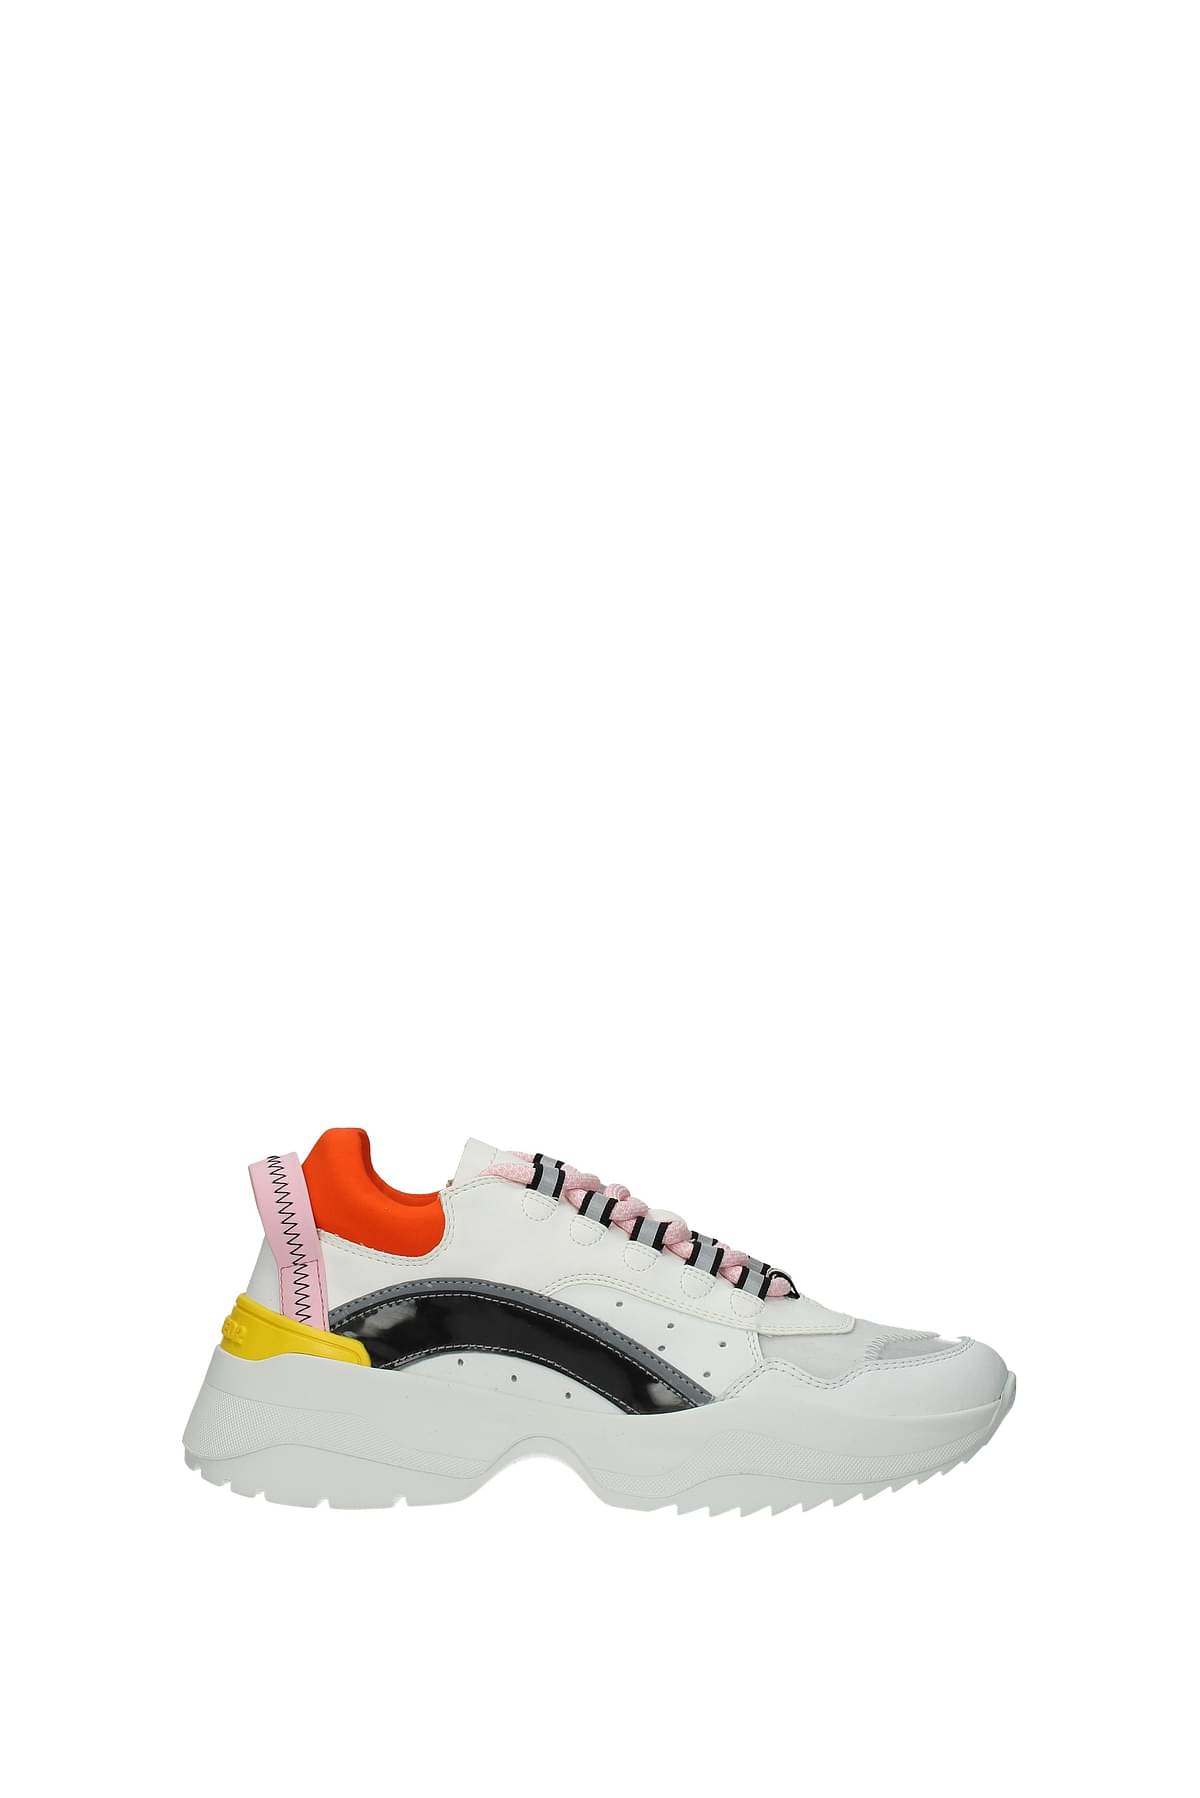 Dsquared2 Sneakers Women SNW010429003841M1689 Rubberized Leather White Orange 244,13€